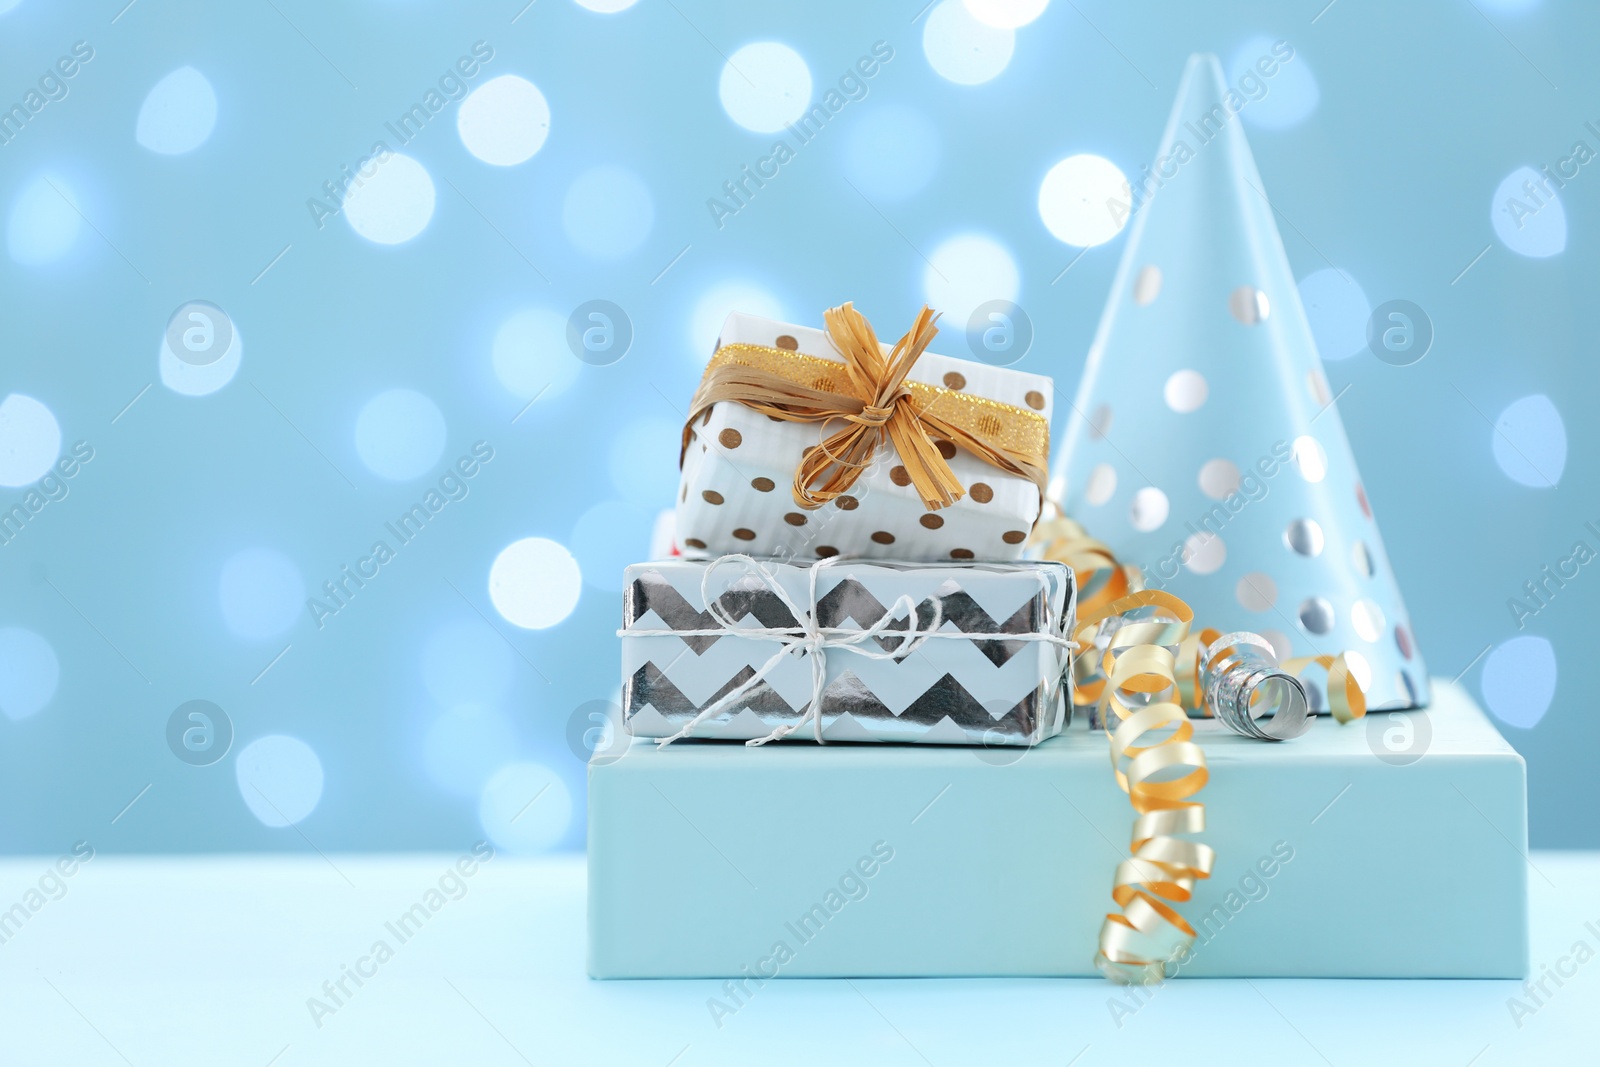 Photo of Gift boxes and party hat on table against blurred lights. Space for text